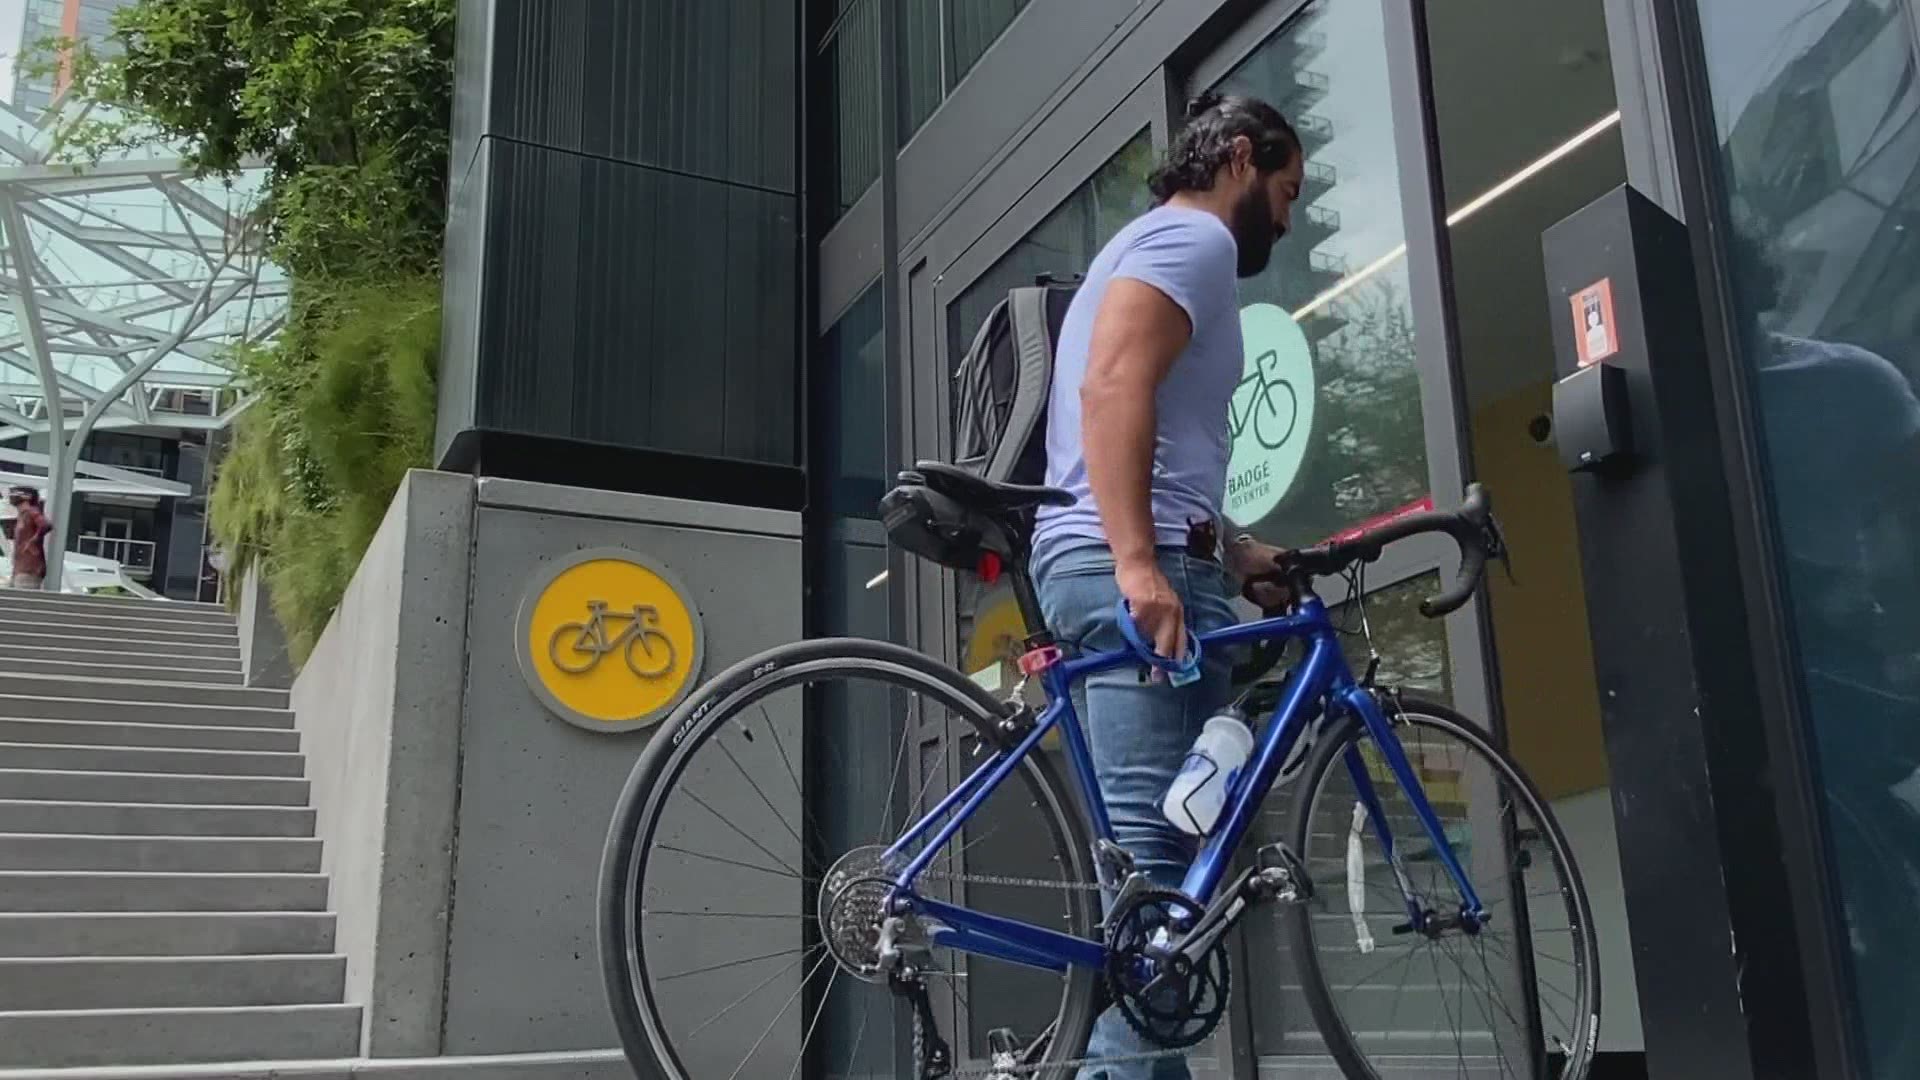 Even Seattle giants like Amazon are getting on board with biking by offering employees money to cycle instead of drive to work.